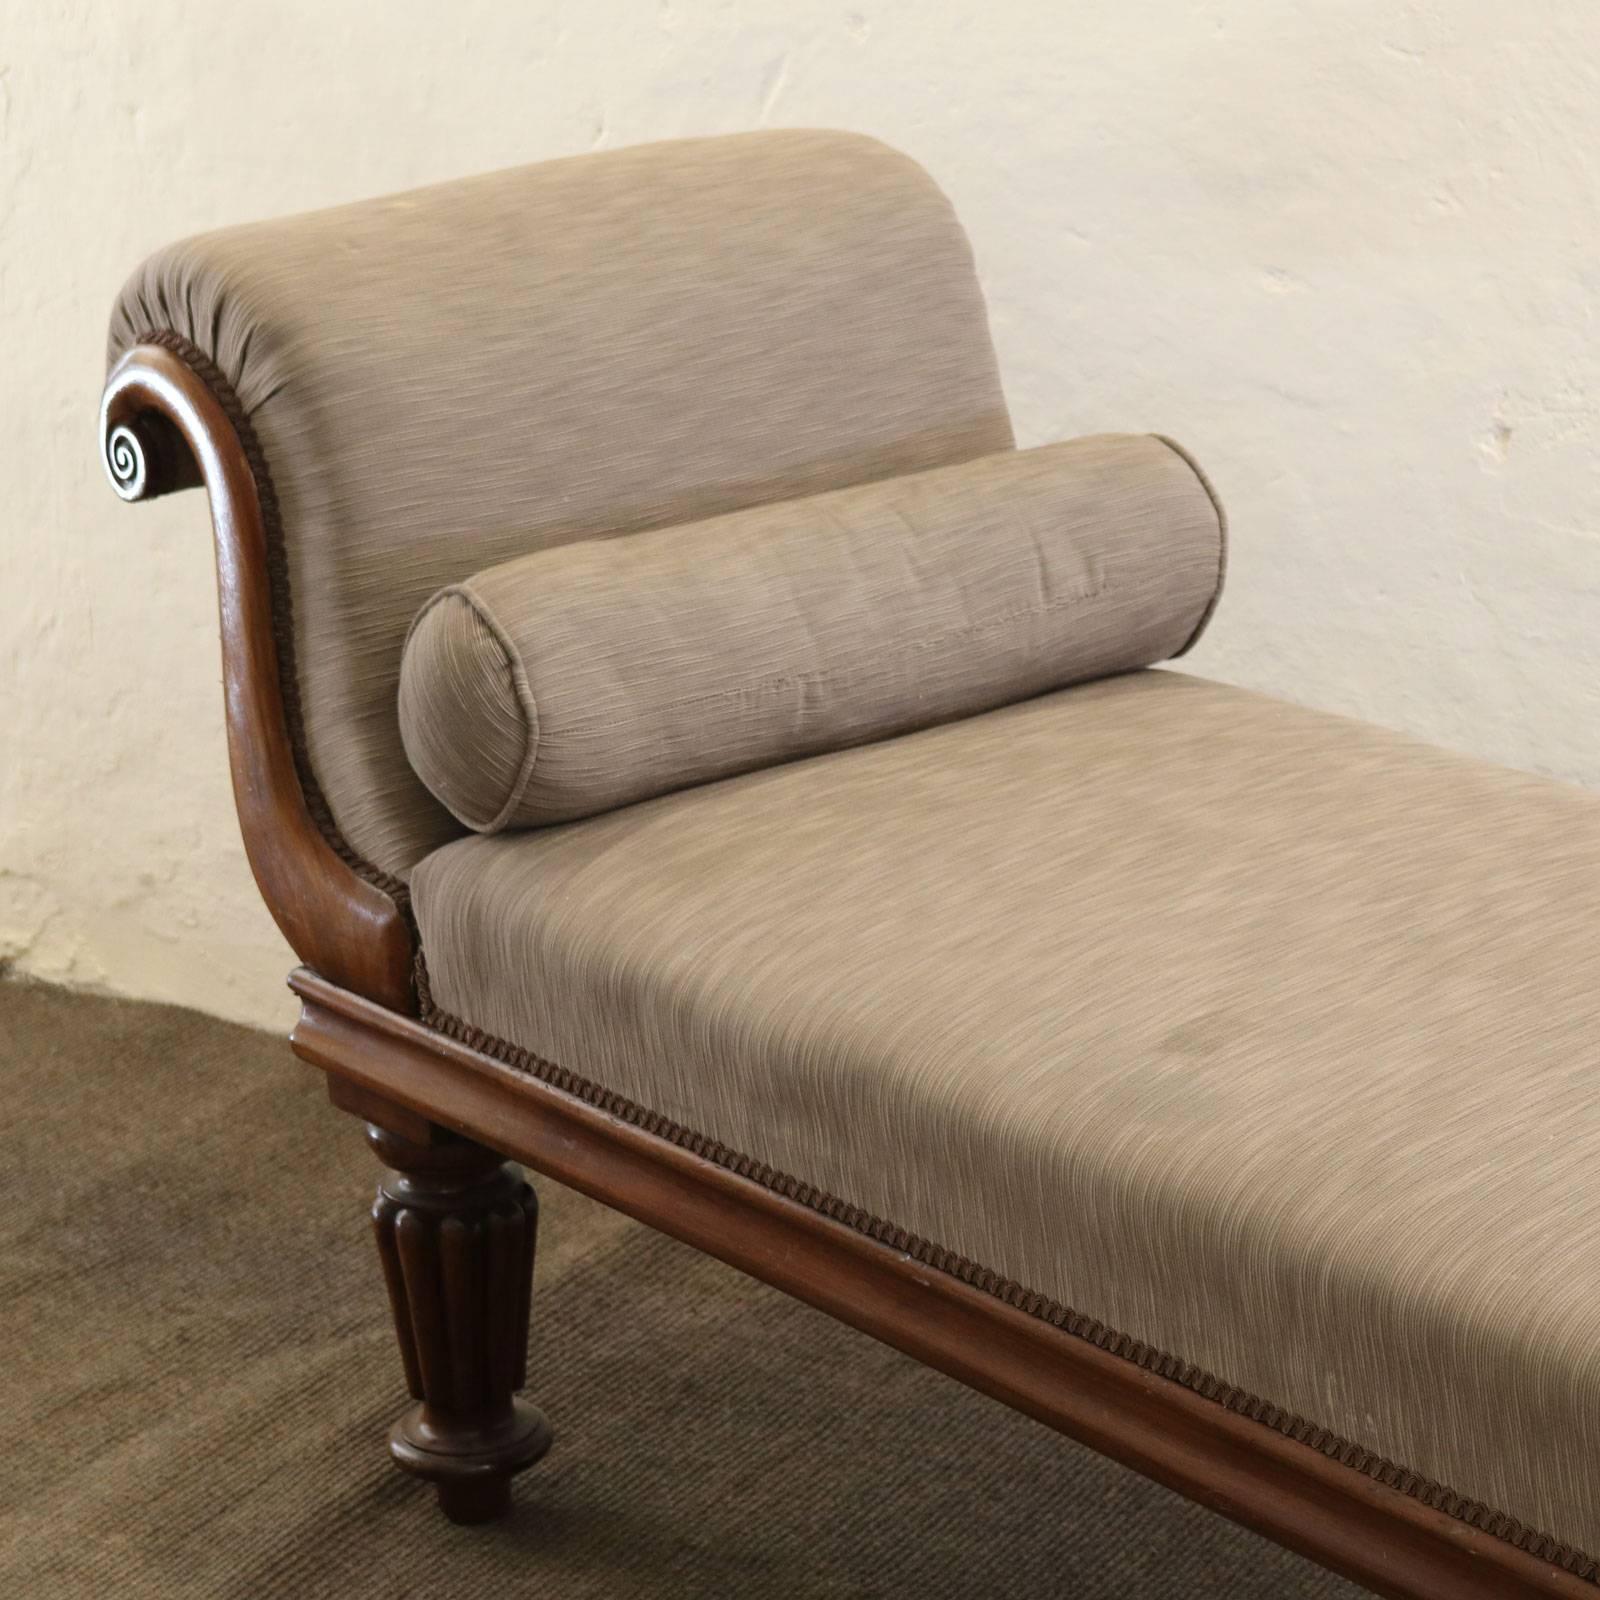 A Victorian mahogany chaise longue with roule end and carved feet. The grey chenille upholstery is a later addition and is showing some marks.